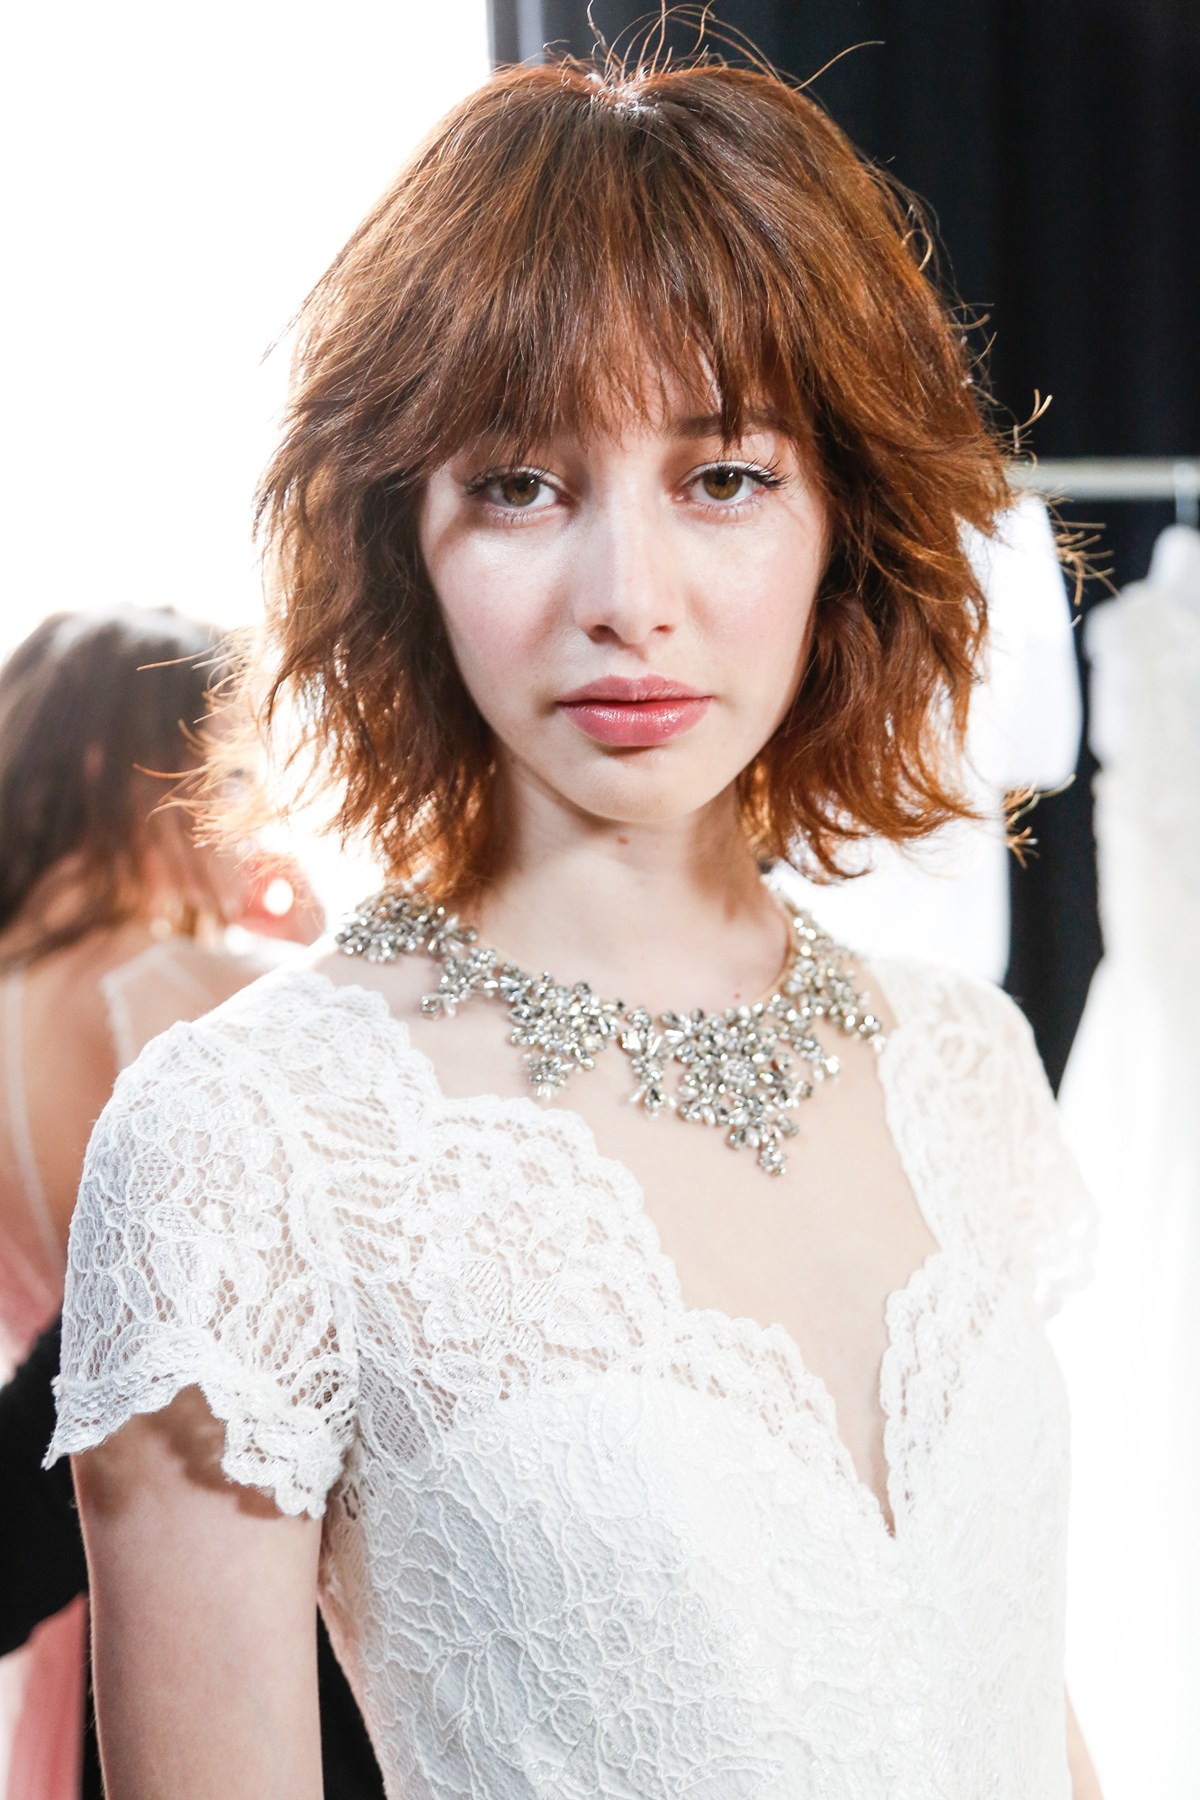 Backstage at the Jenny Packham 2018 bridal collection, New York, April 2017.